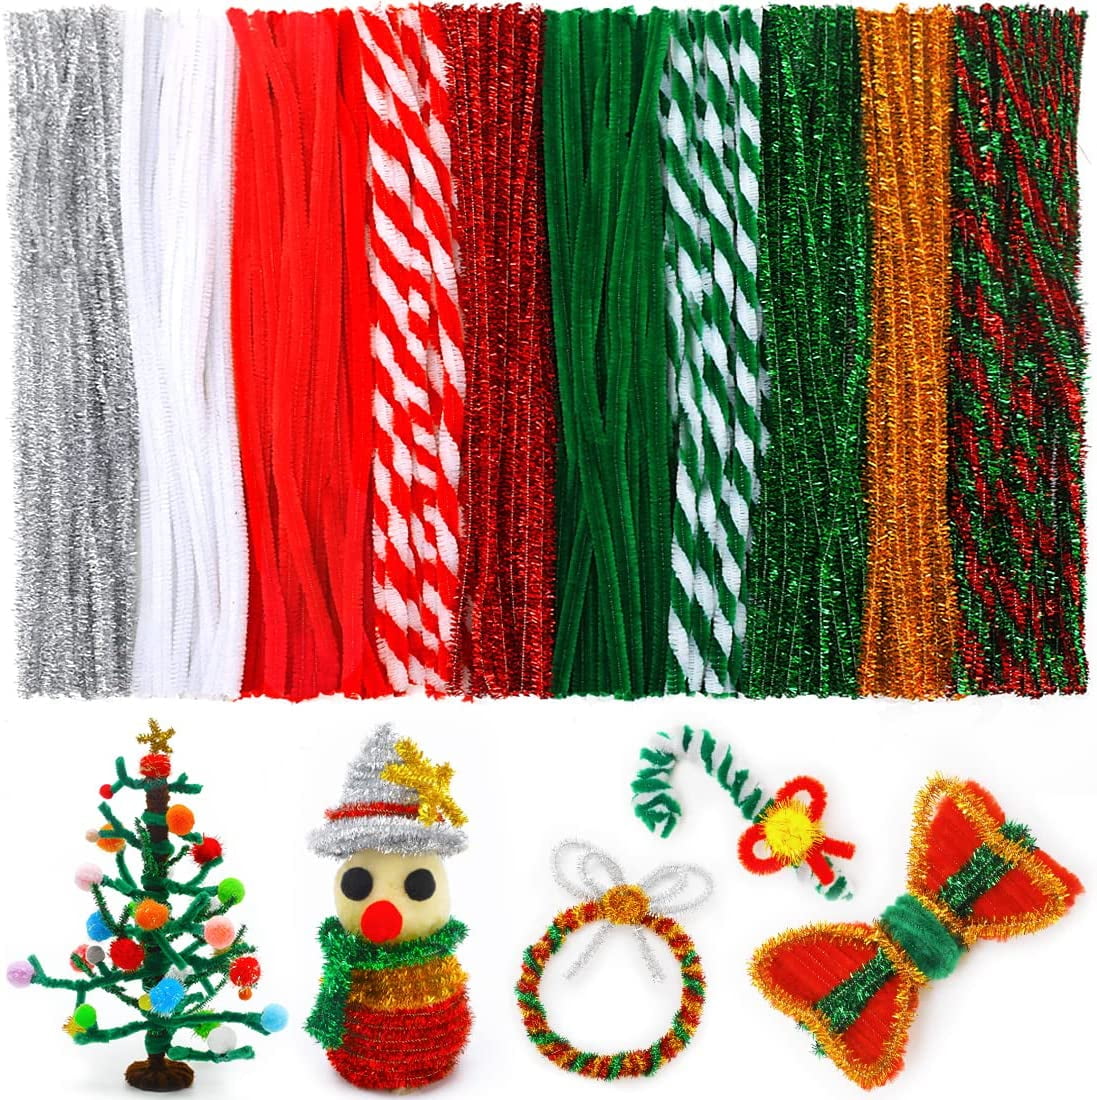 Libima 3800 Pcs Pipe Cleaners Bulk 20 Colors Christmas Pipe Cleaners Craft  Supplies Chenille Stems Pipe Craft Making Art Supplies for DIY Project Arts